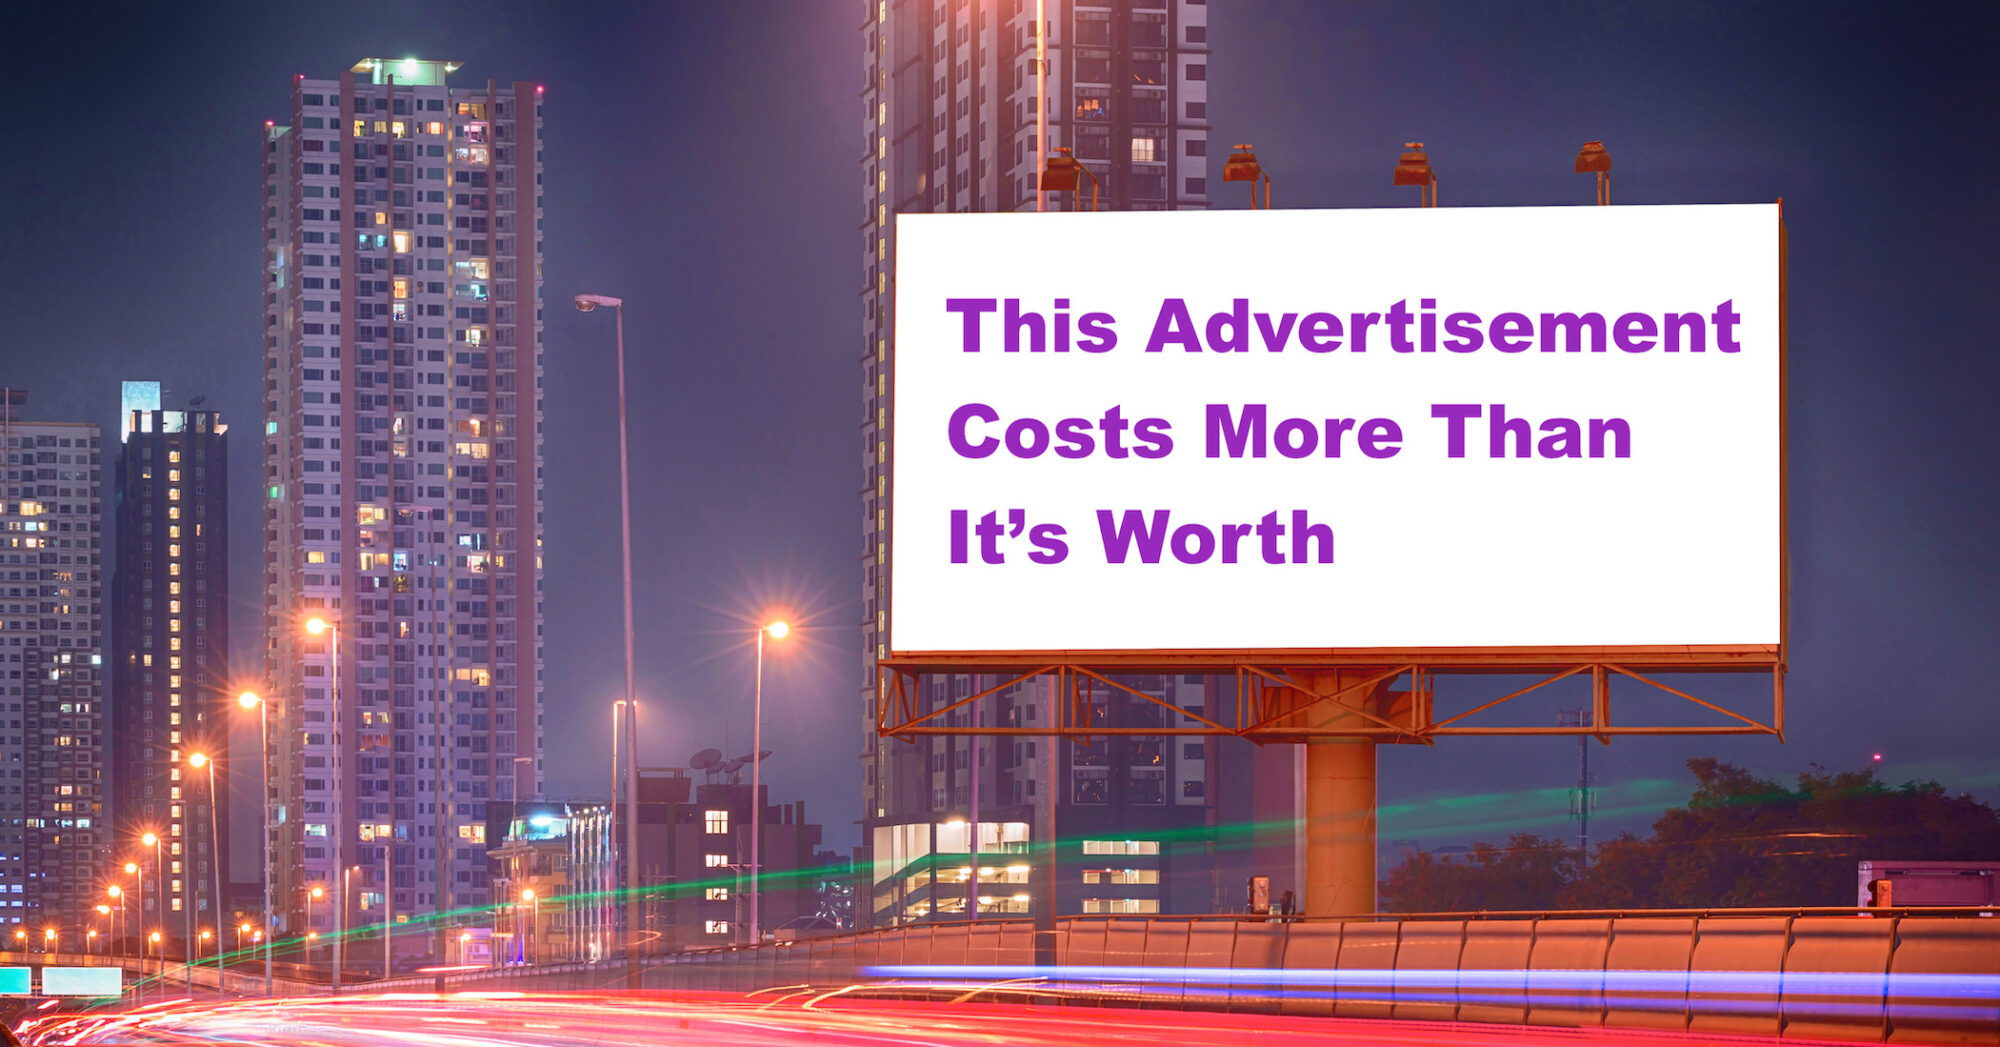 Billboard saying This Lawyer Advertising Costs More Than It's Worth | Vanguard Communications Law Market Link | Denver, CO